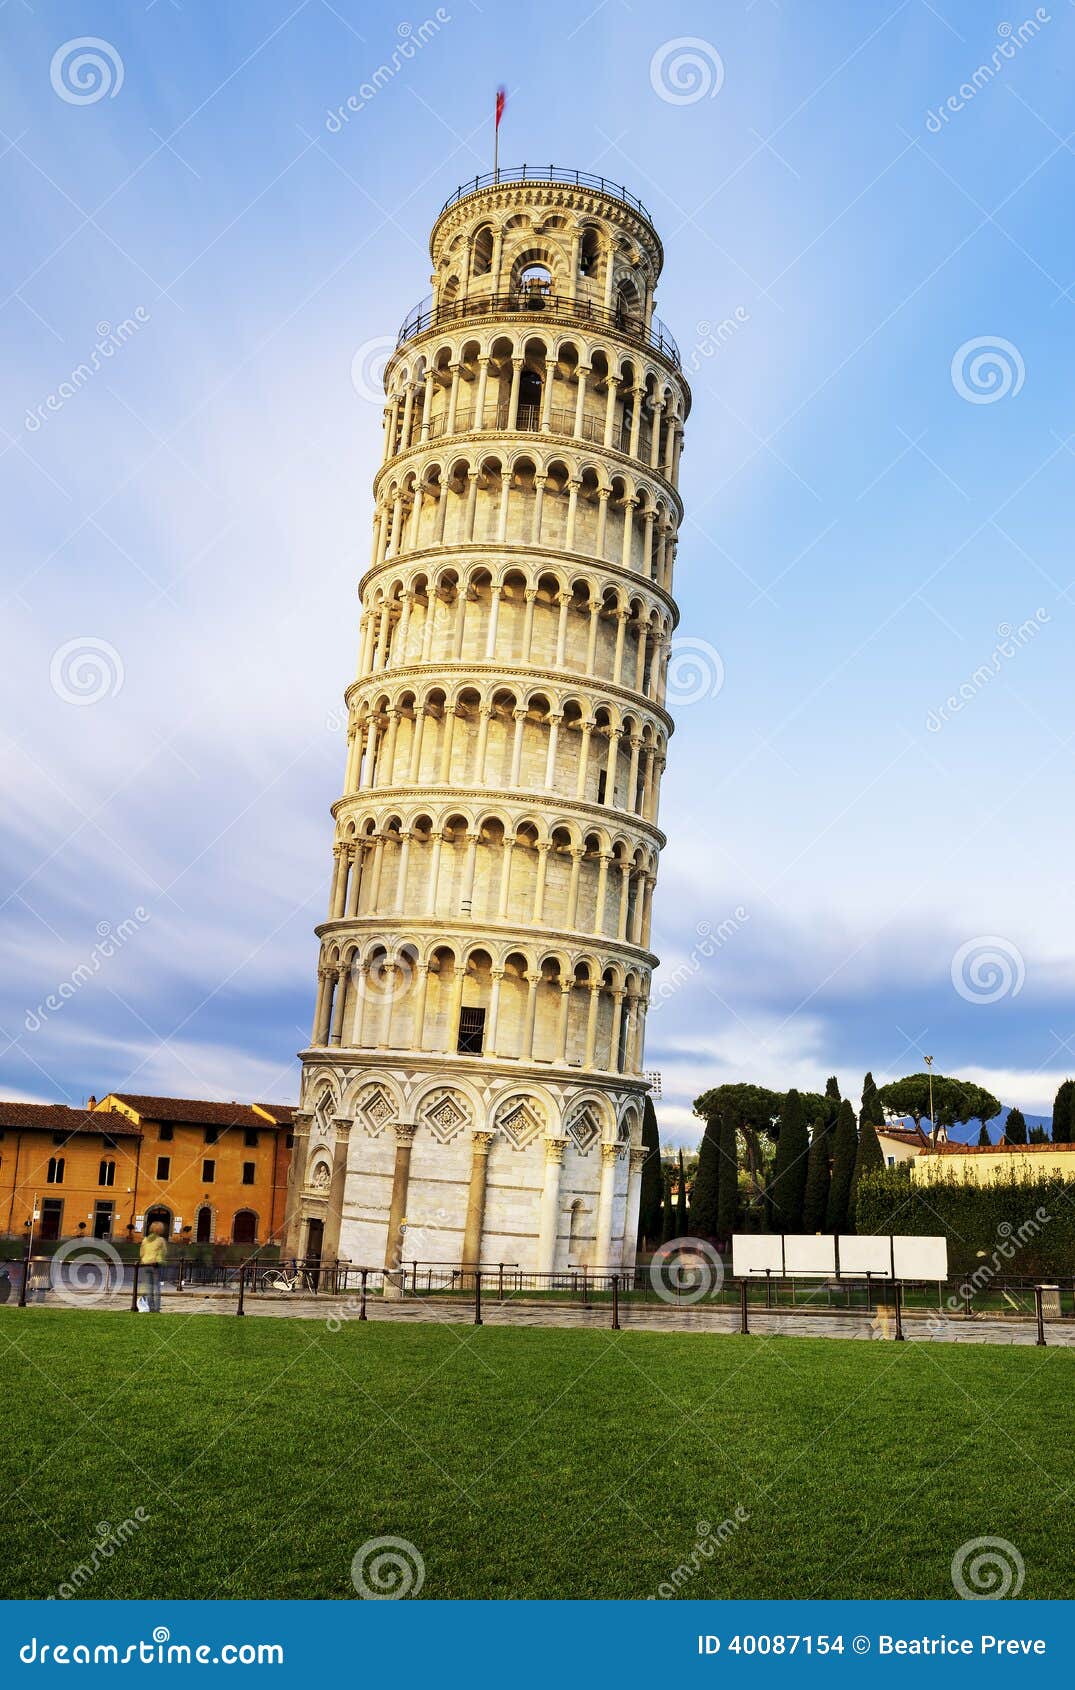 pisa leaning tower, italy